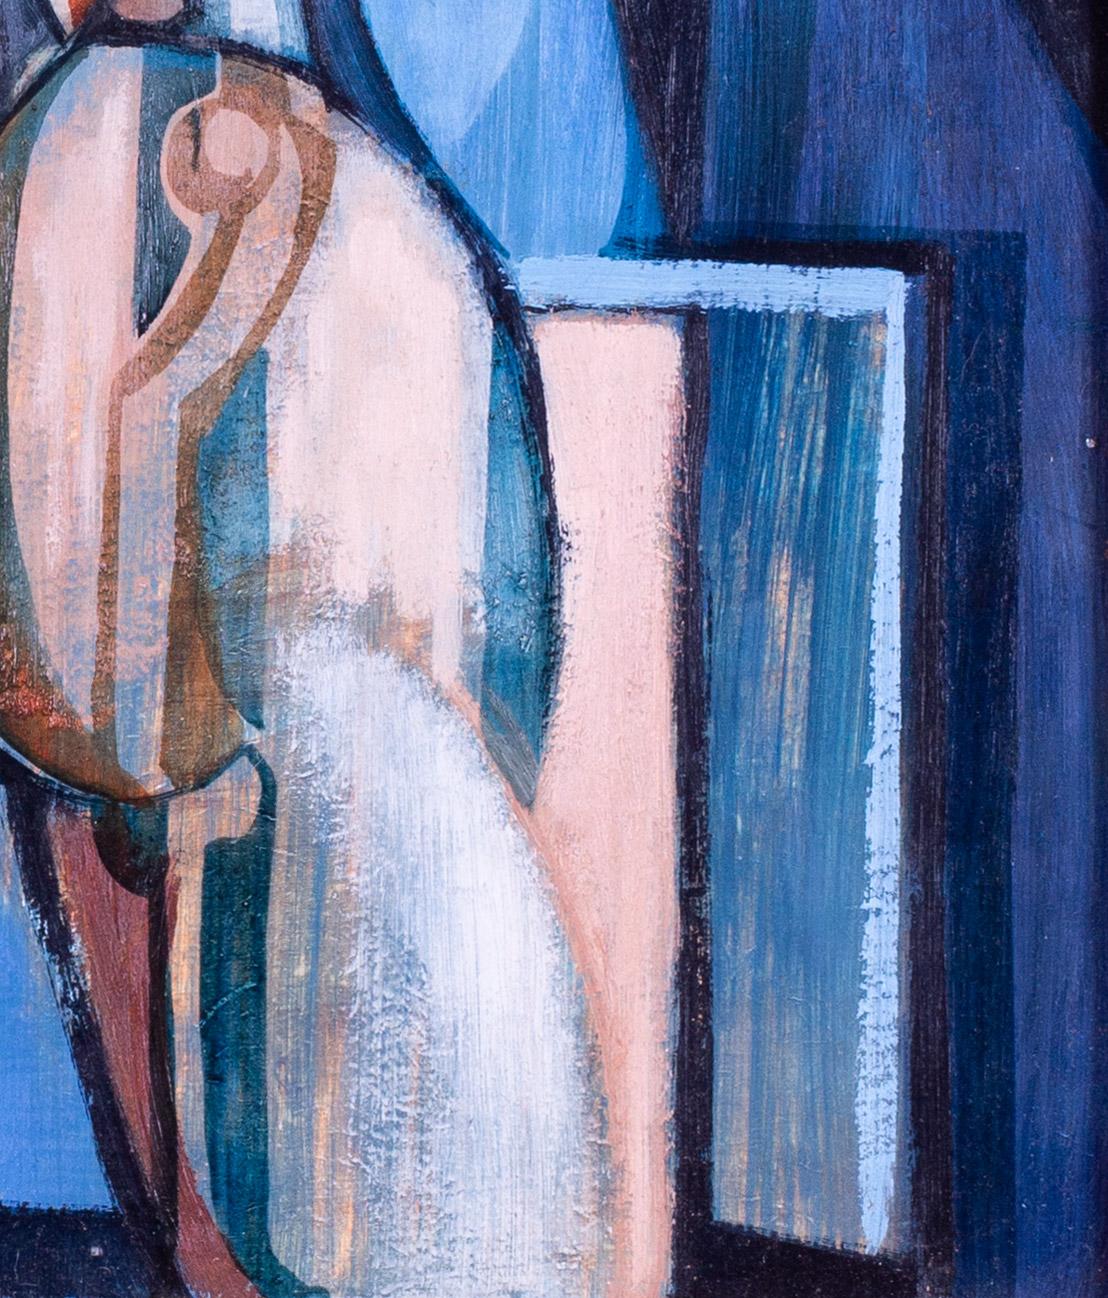 20th Century British abstract painting 'Gladiator' by Roger Smith, in blues 1